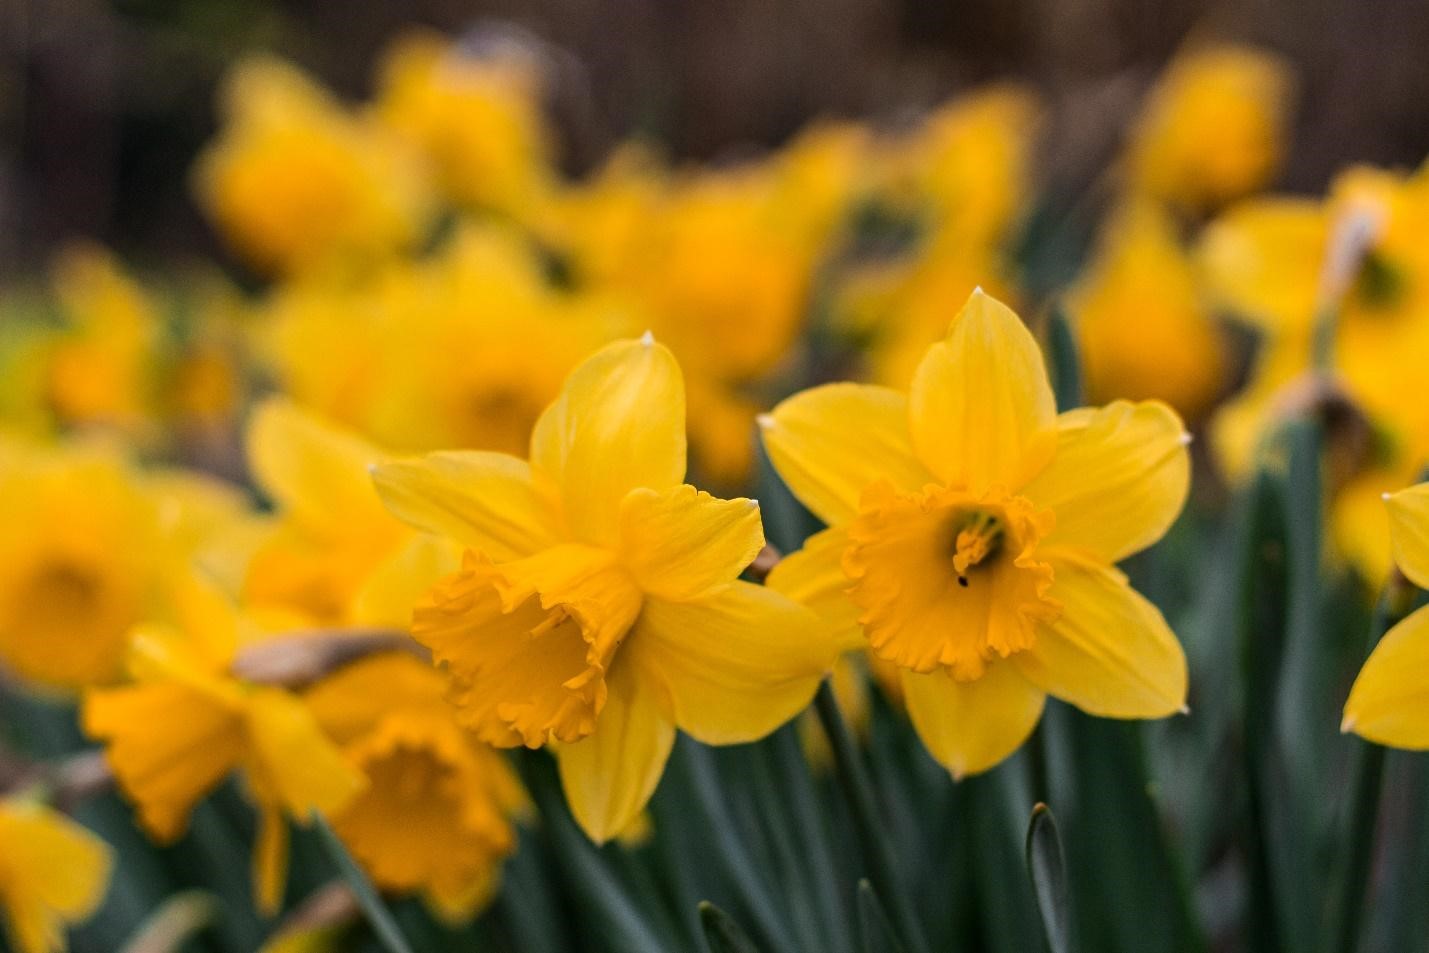 Daffodils-National flower of Wales